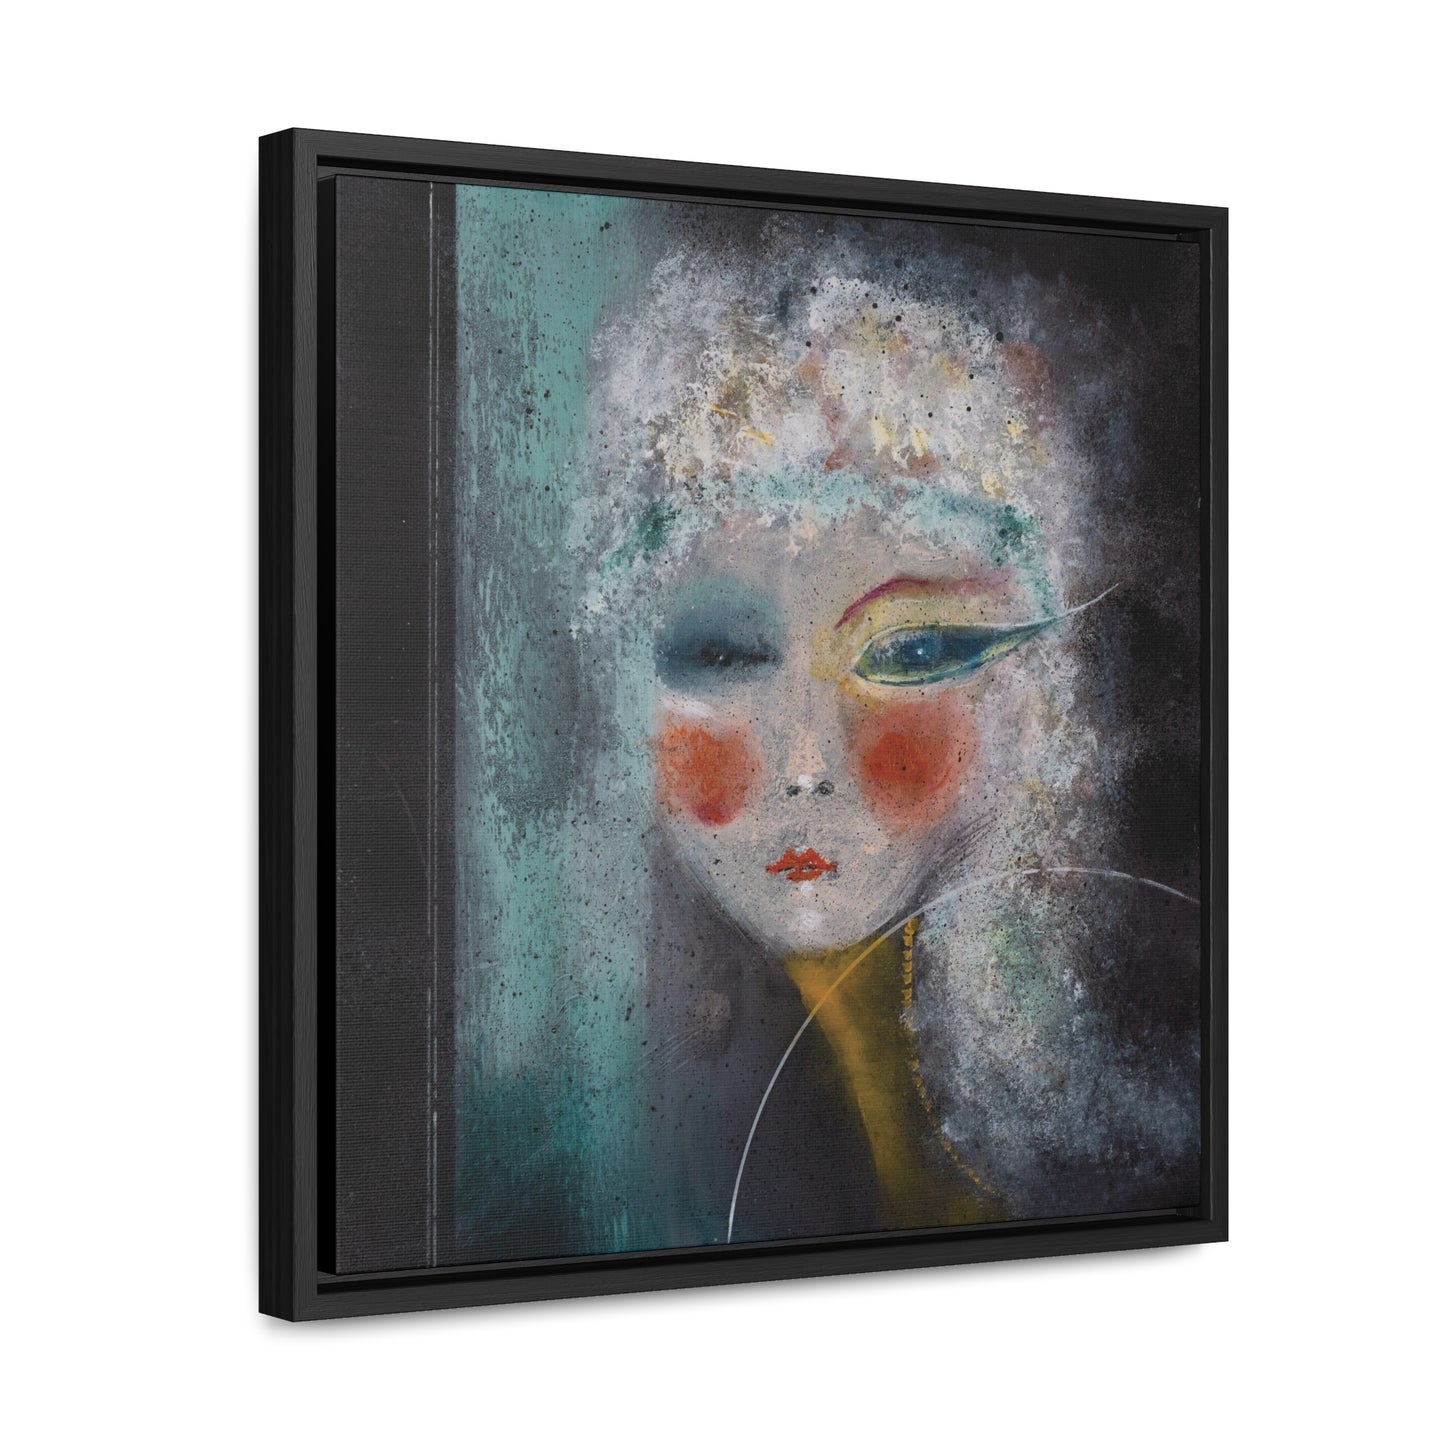 Empowering Asian-Inspired Art - 'Let Me Be Me' by Asia Popinska - Unique Woman's Portrait on Floating Gallery Canvas